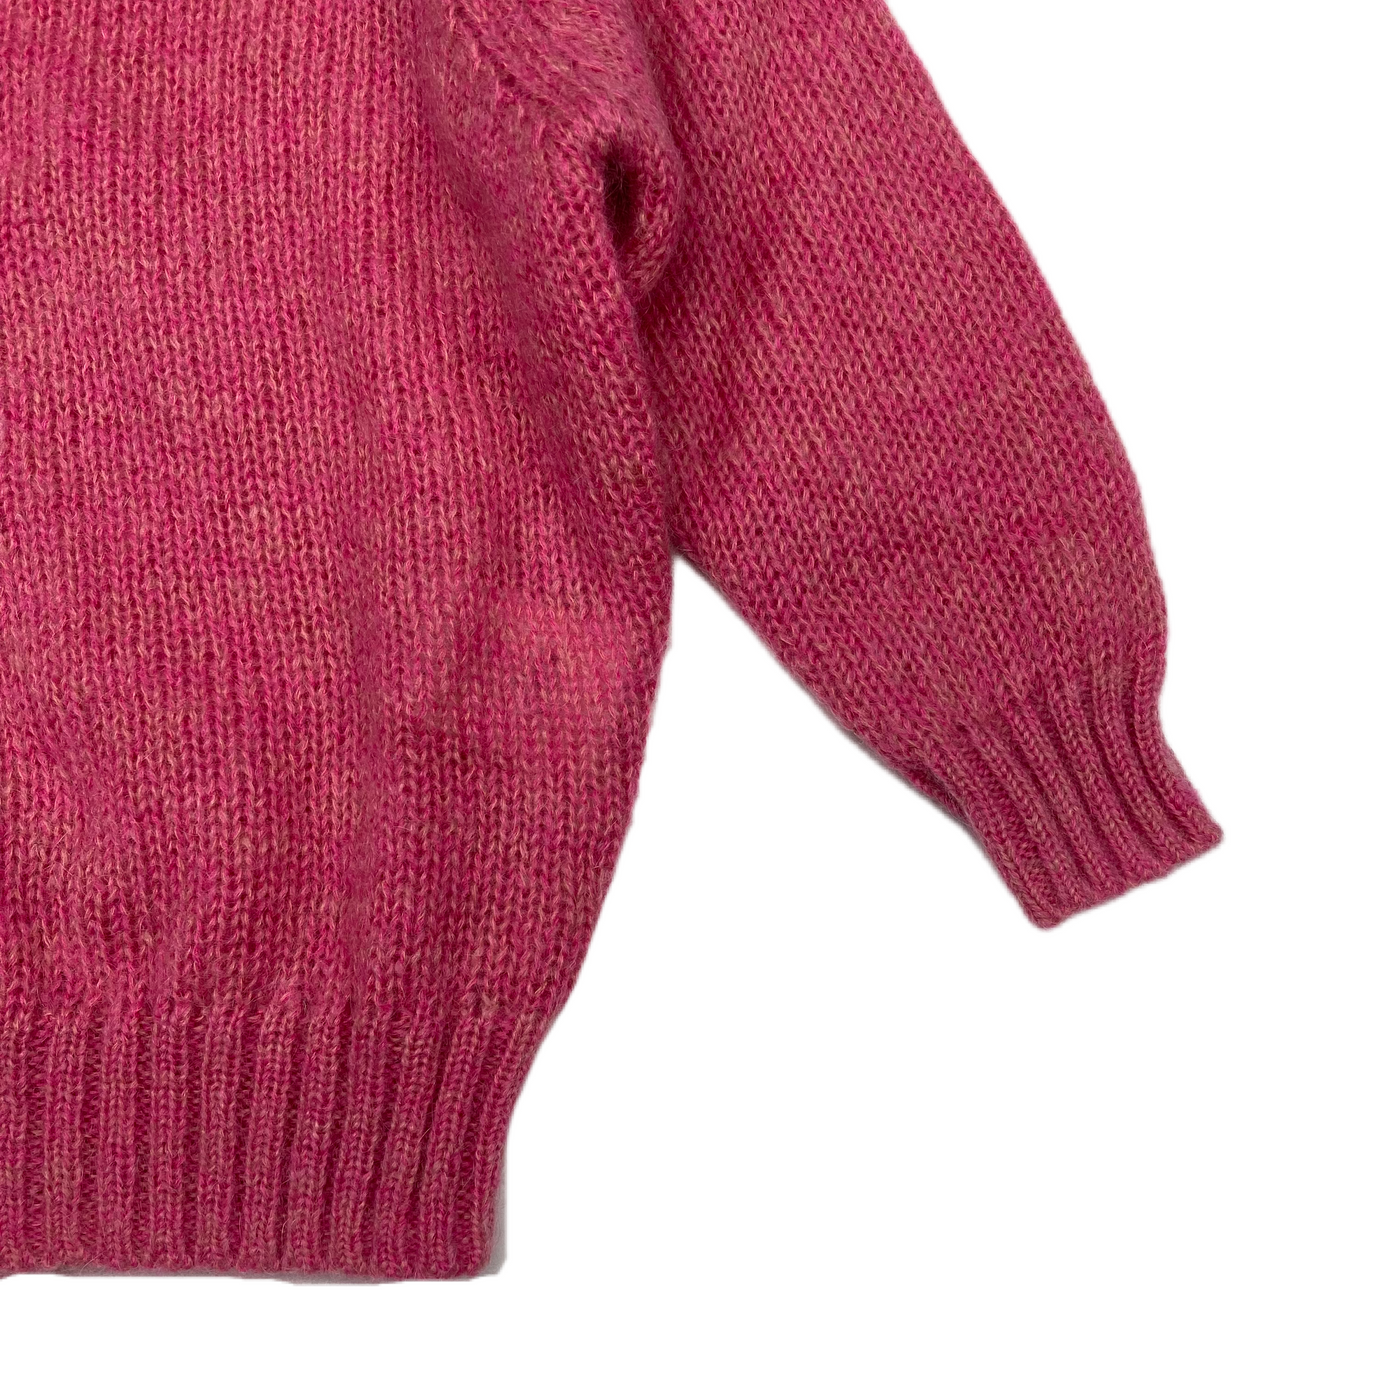 Repose ams. - Oversized knitted sweat pinkish coral 2y & 14y